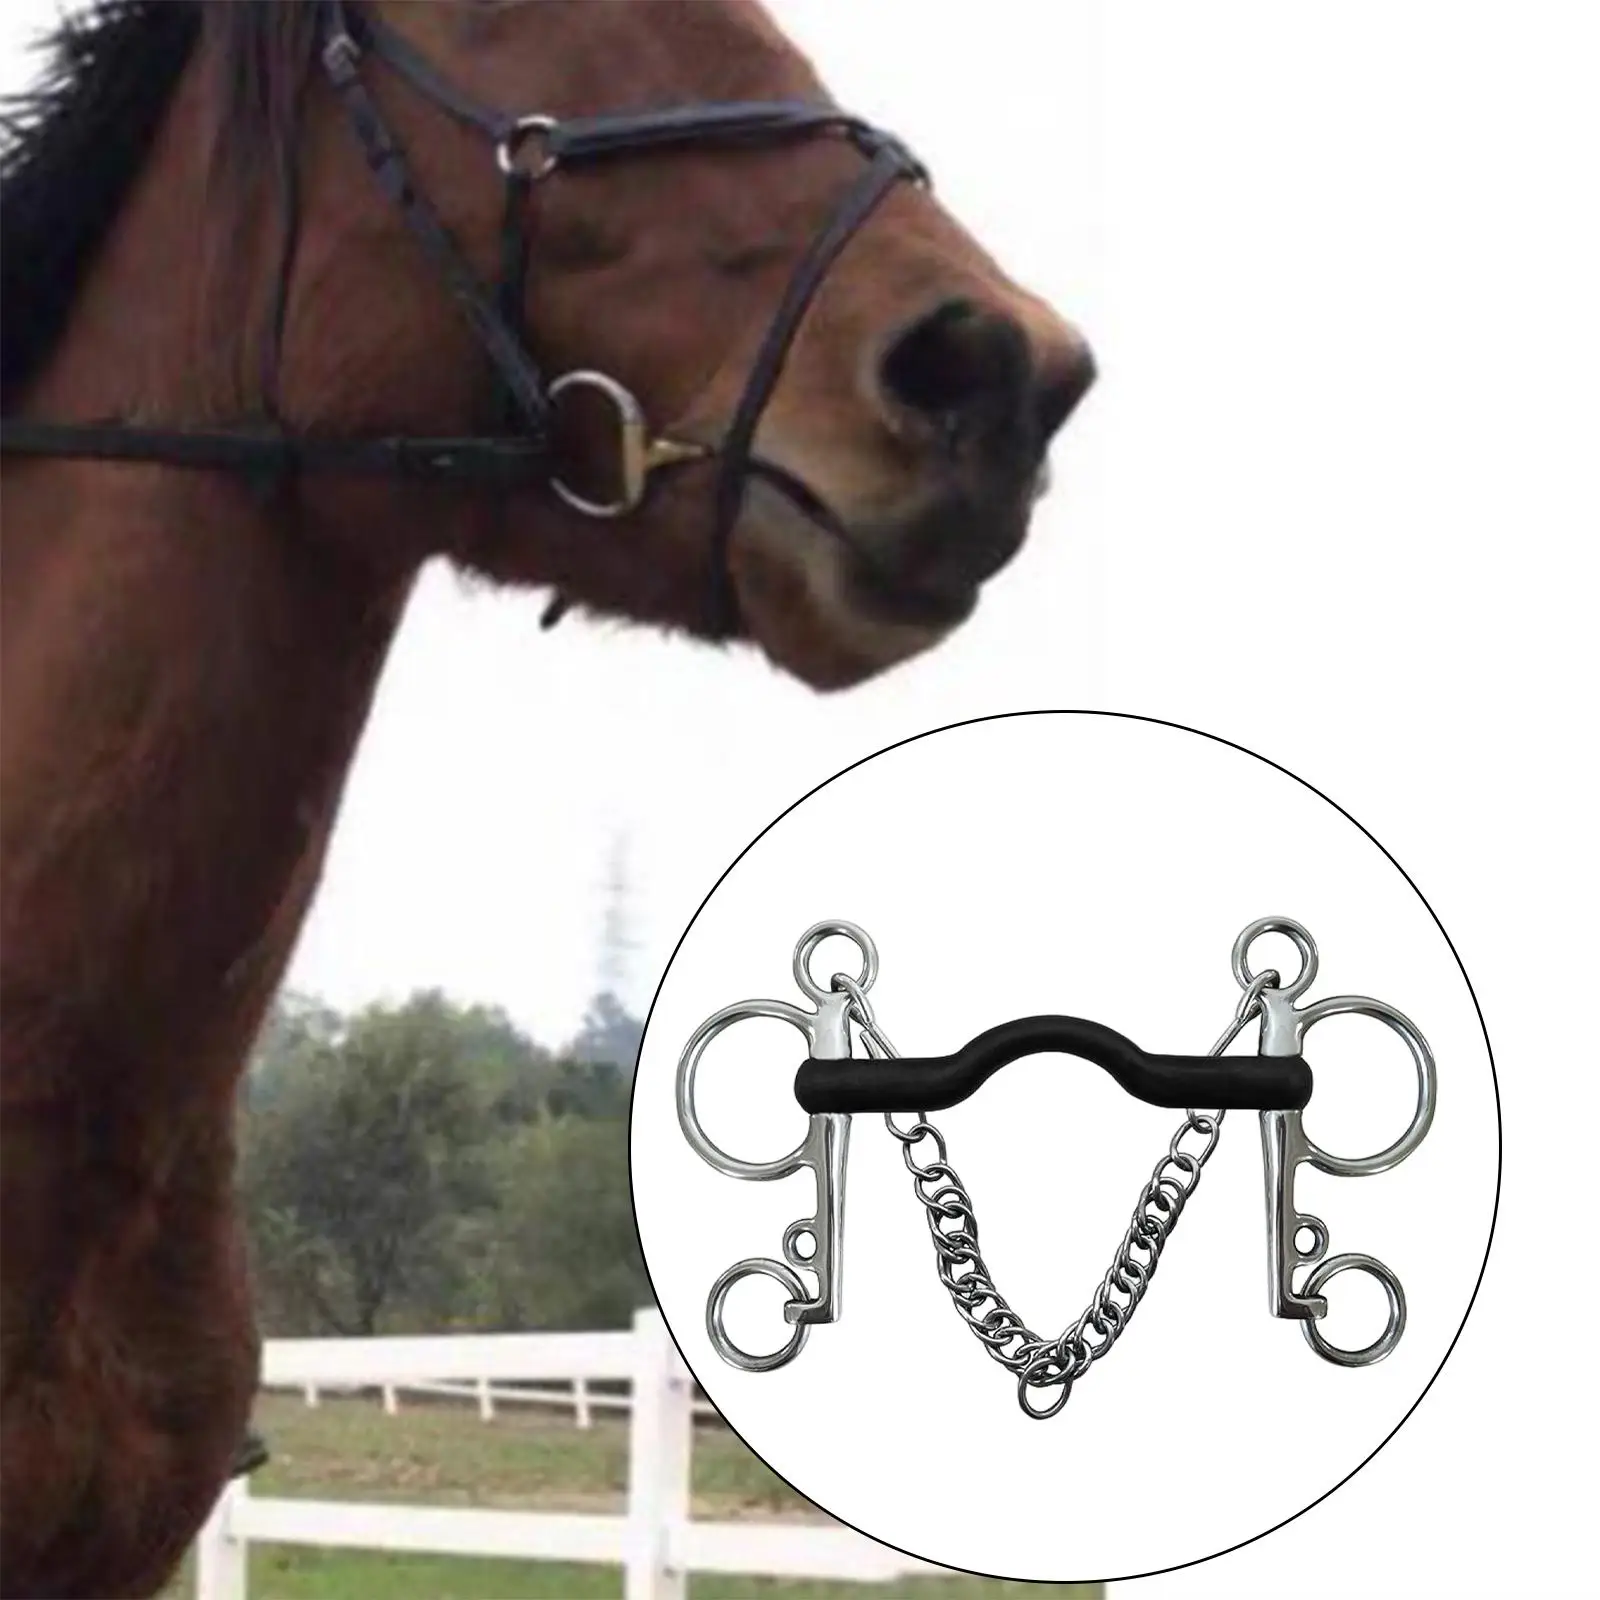 horse Bit W/Curb Hooks Chain with Silver Trims Horse Gag Bit Cheek Mouth for Horse Chewing Horse Bridle Training Equipment